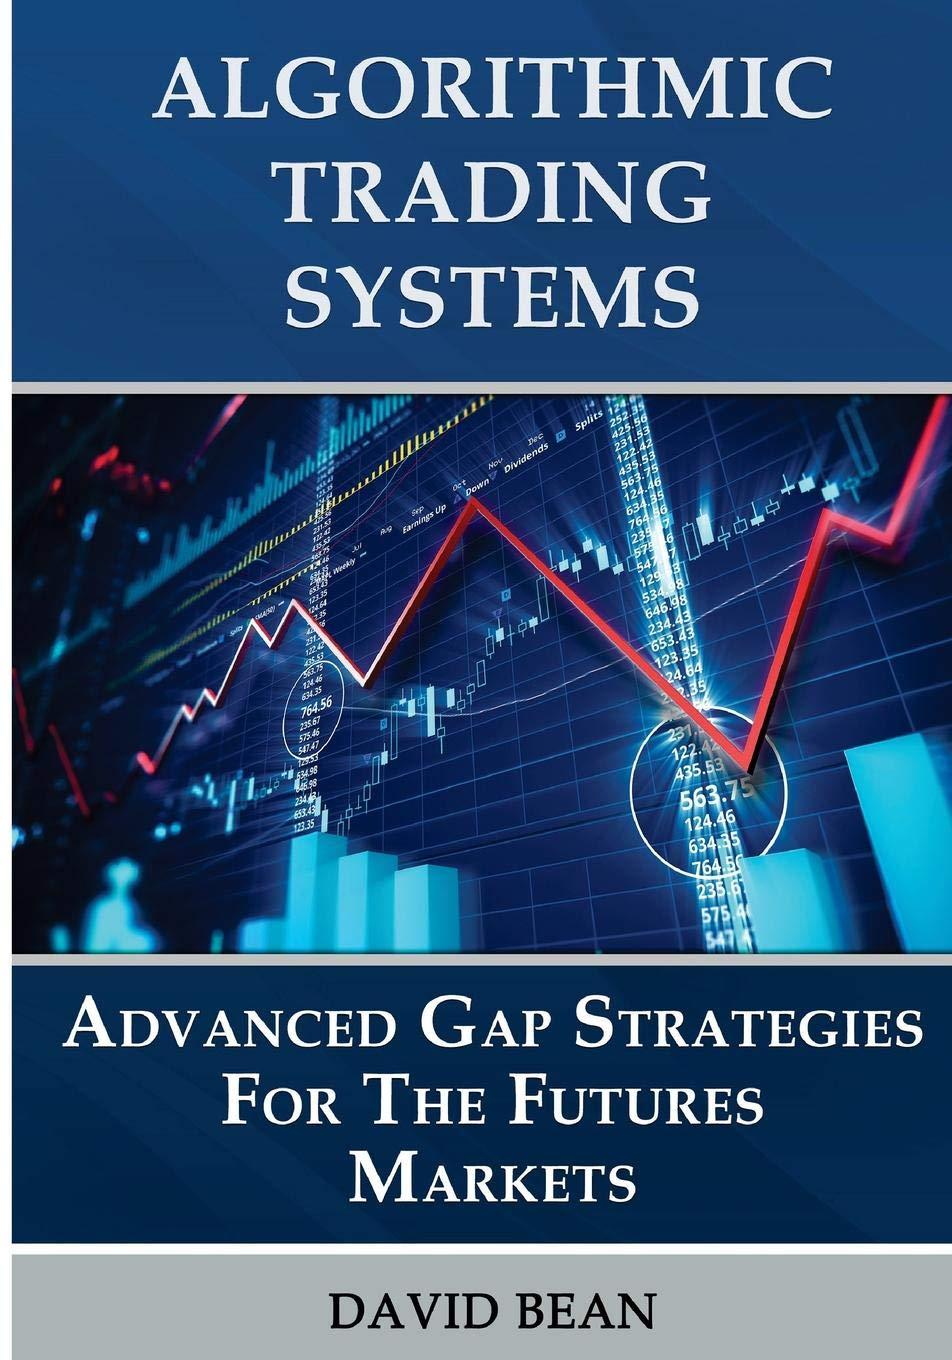 Algorithmic Trading Systems Advanced Gap Strategies For The Futures Markets